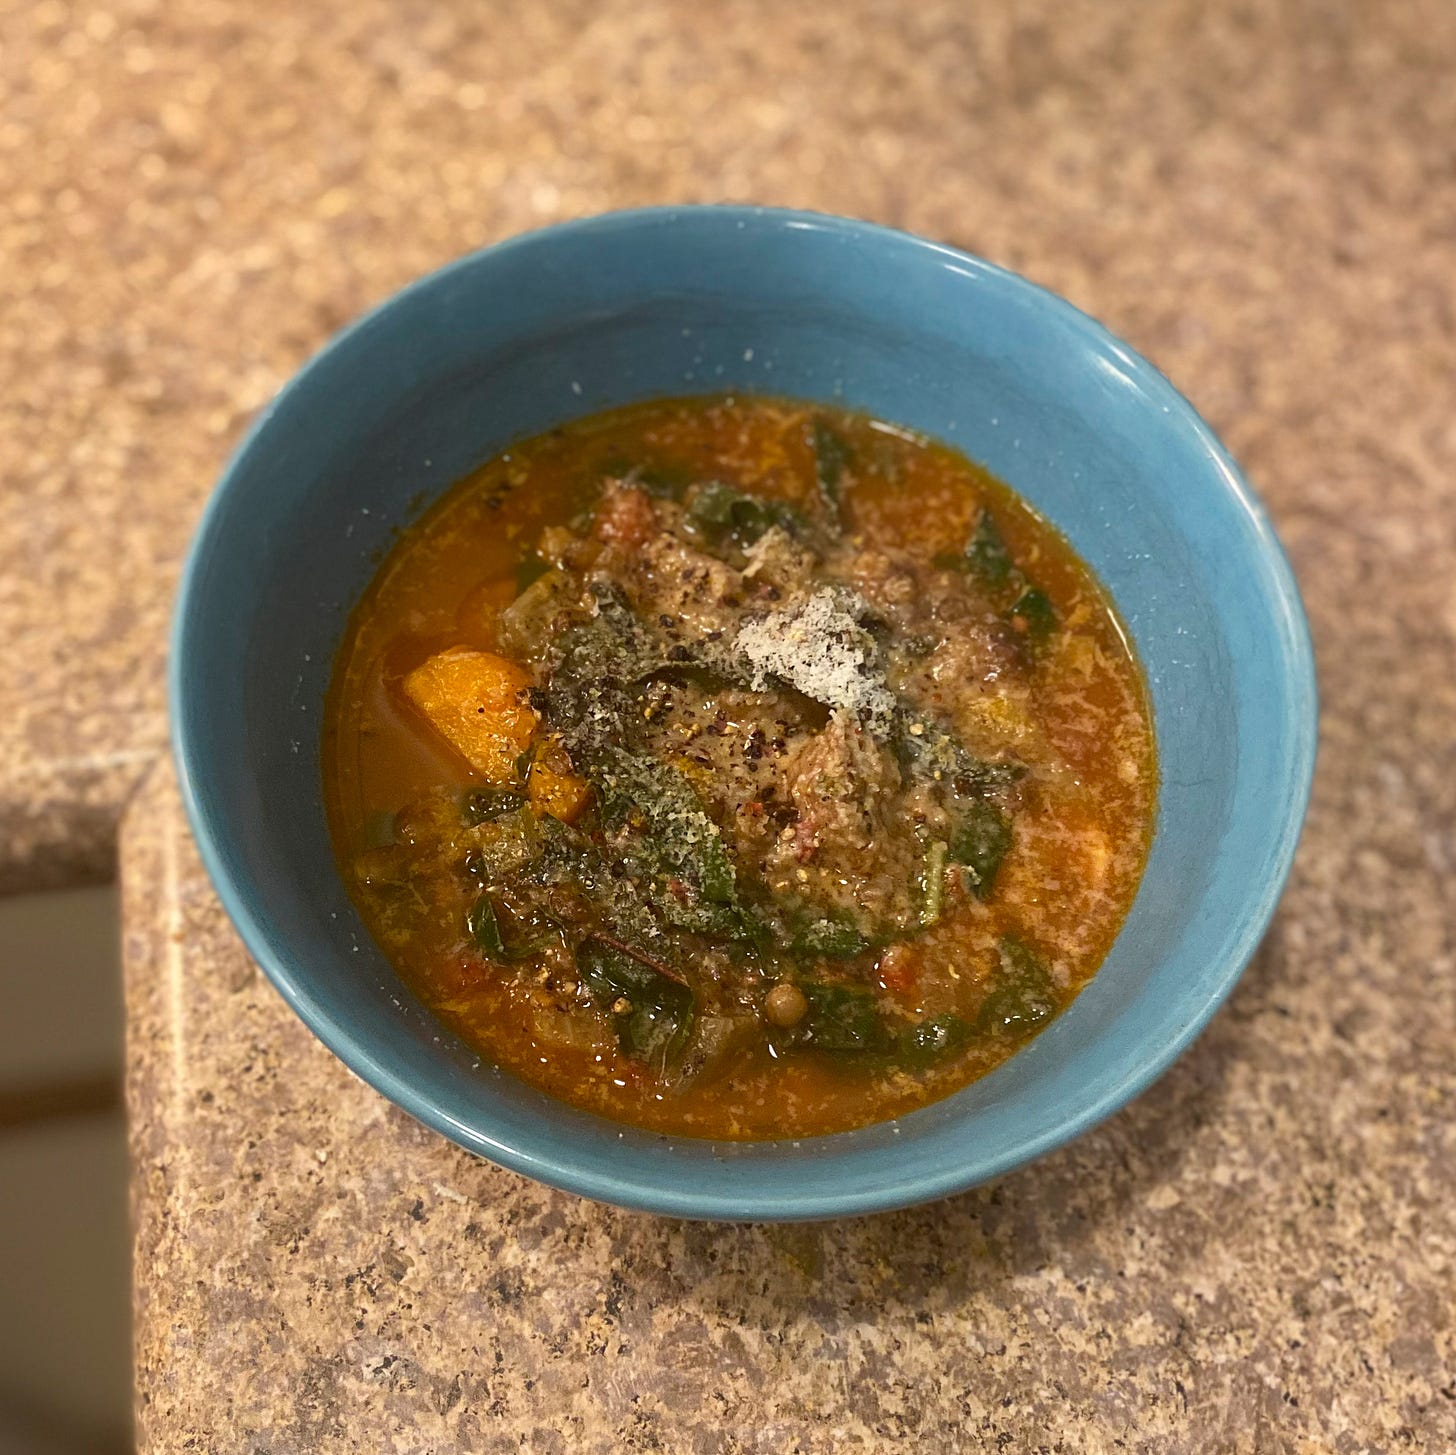 A blue bowl of lentil soup with ribbons of swiss chard, pieces of carrot, and sausage visible. On top is a dusting of grated pecorino.